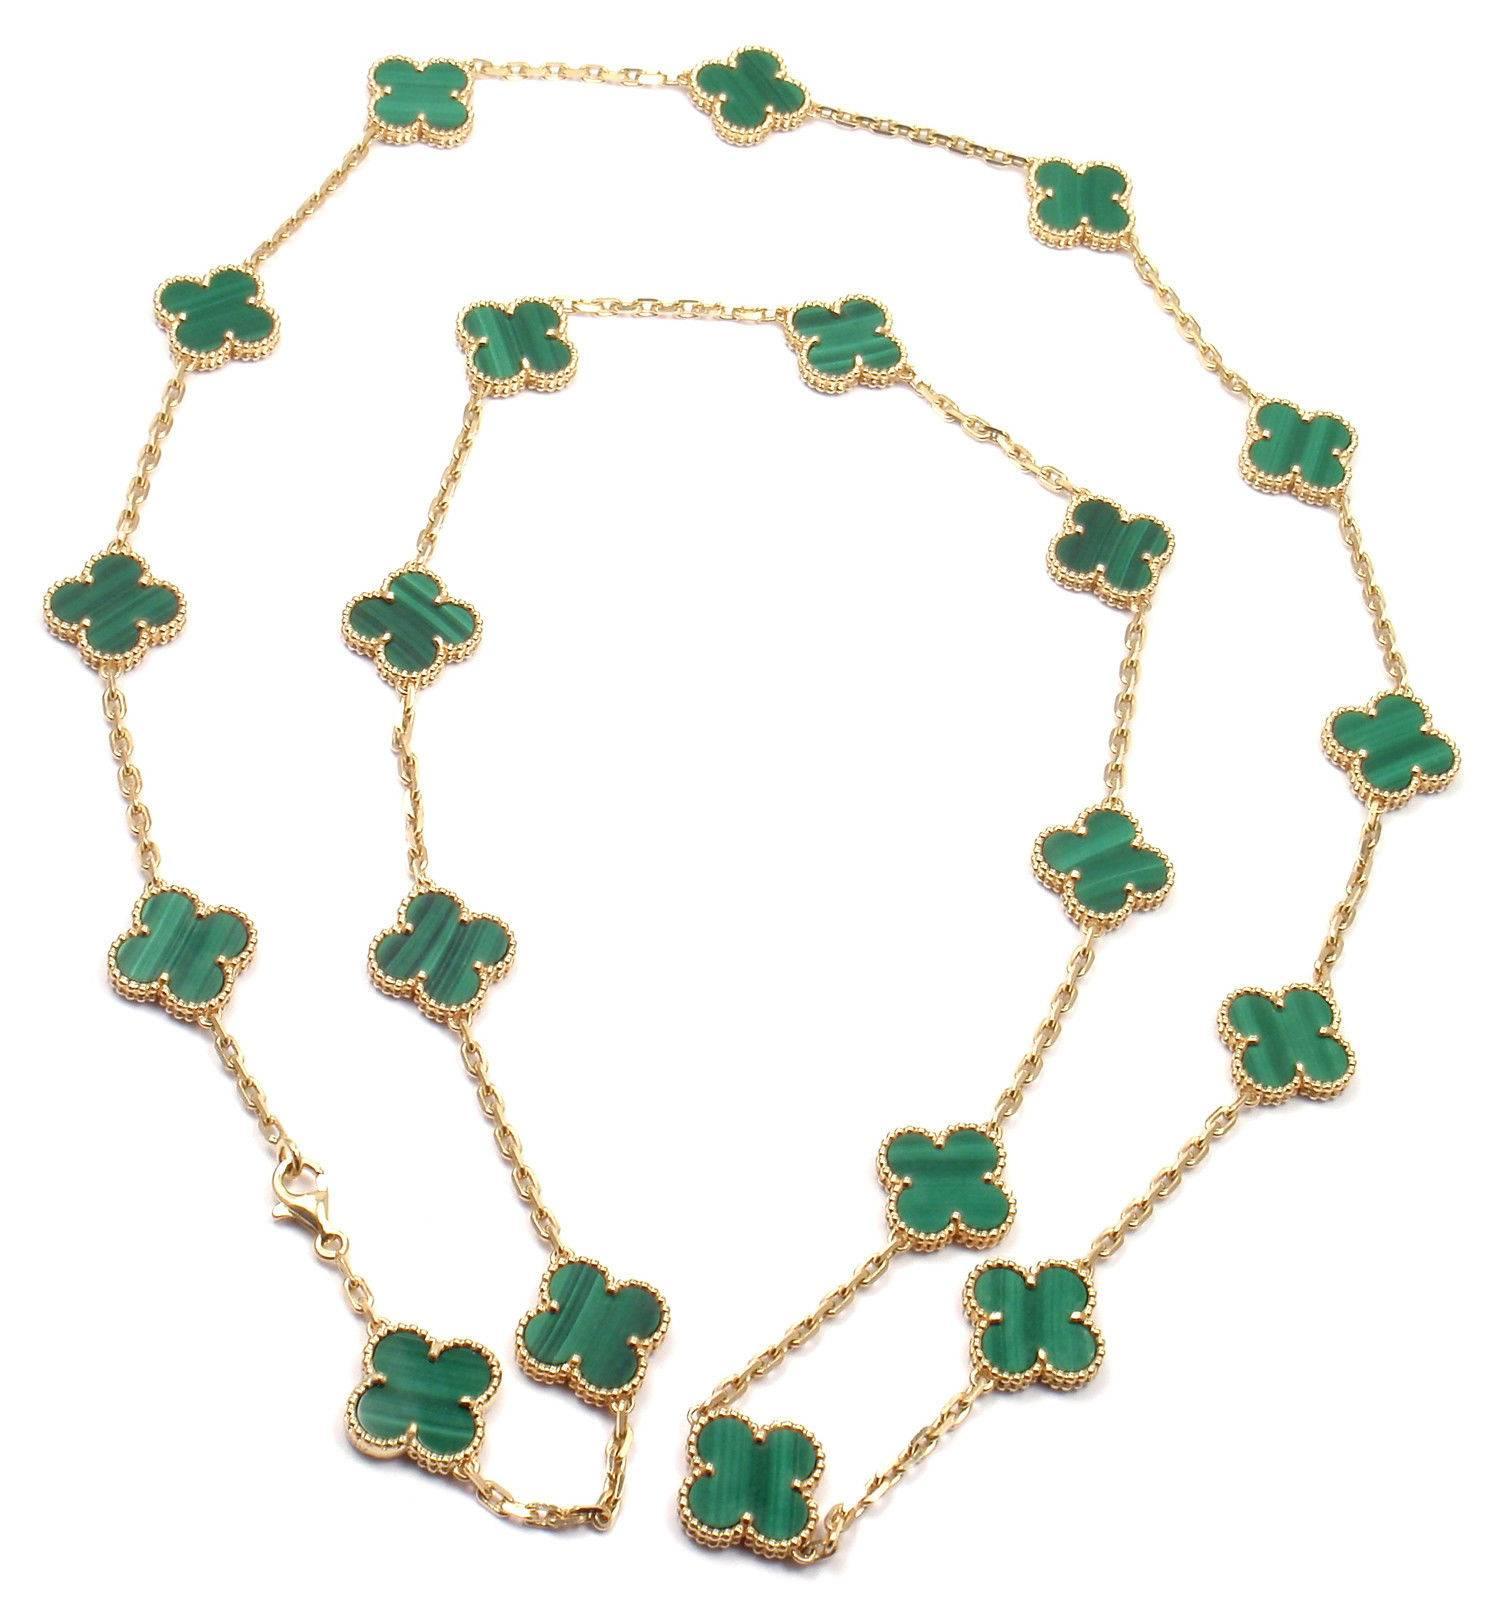 18k Yellow Gold Alhambra 20 Motifs Malachite Necklace by
Van Cleef & Arpels.
With 20 motifs of Malachite Alhambra stones 15mm each

Details:
Length: 33.5